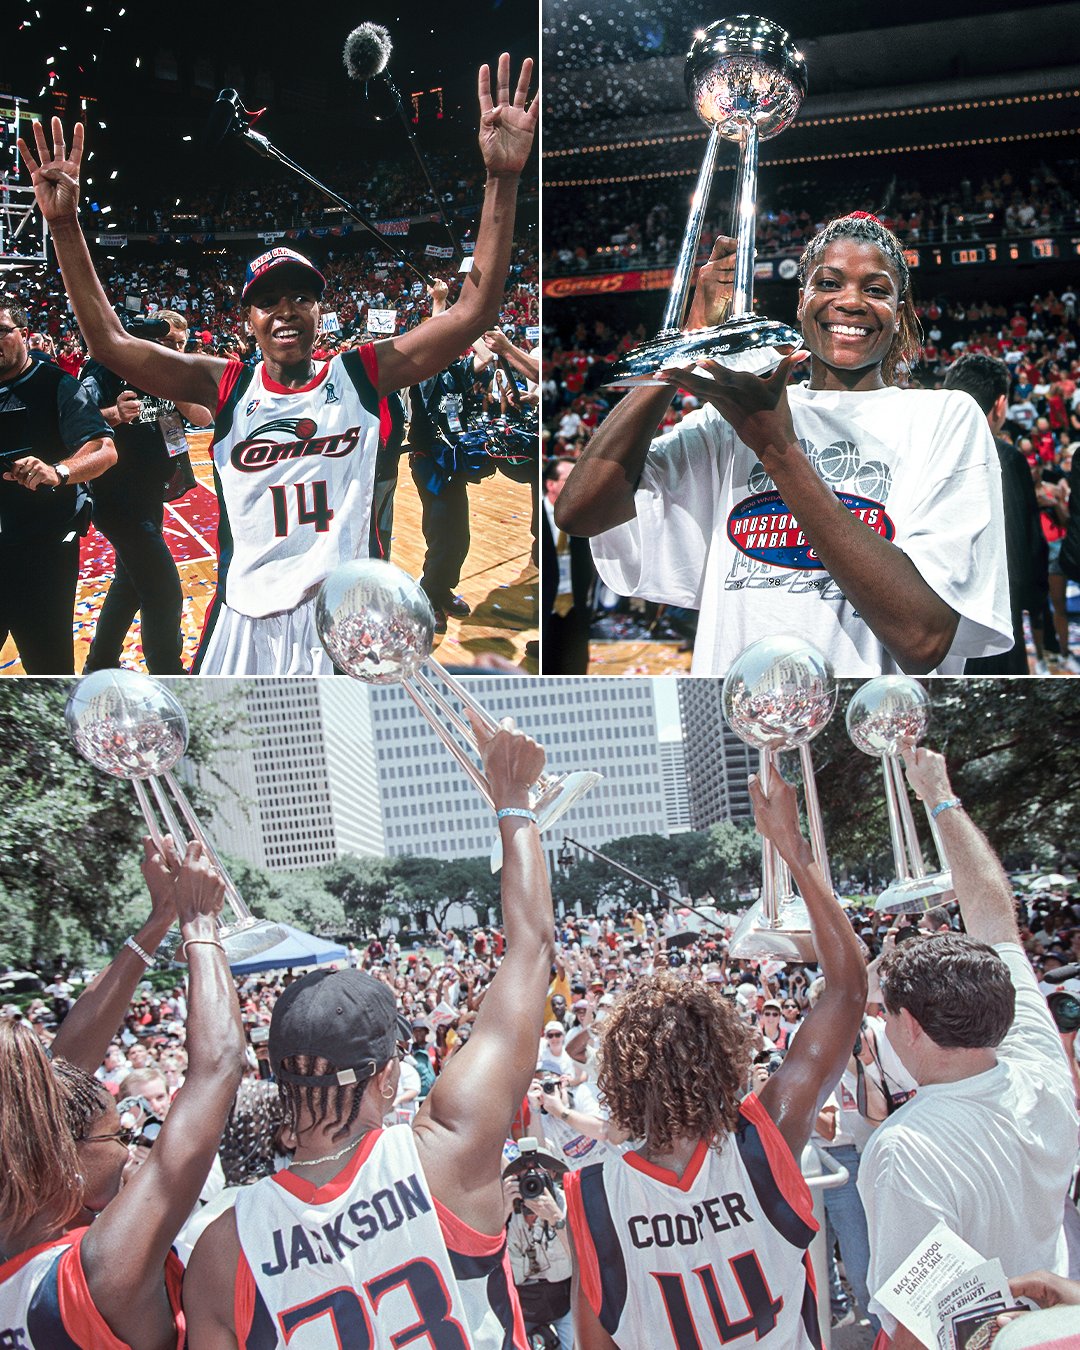 ESPN on X: The Houston Comets' dynasty was next level 🤩 (h/t